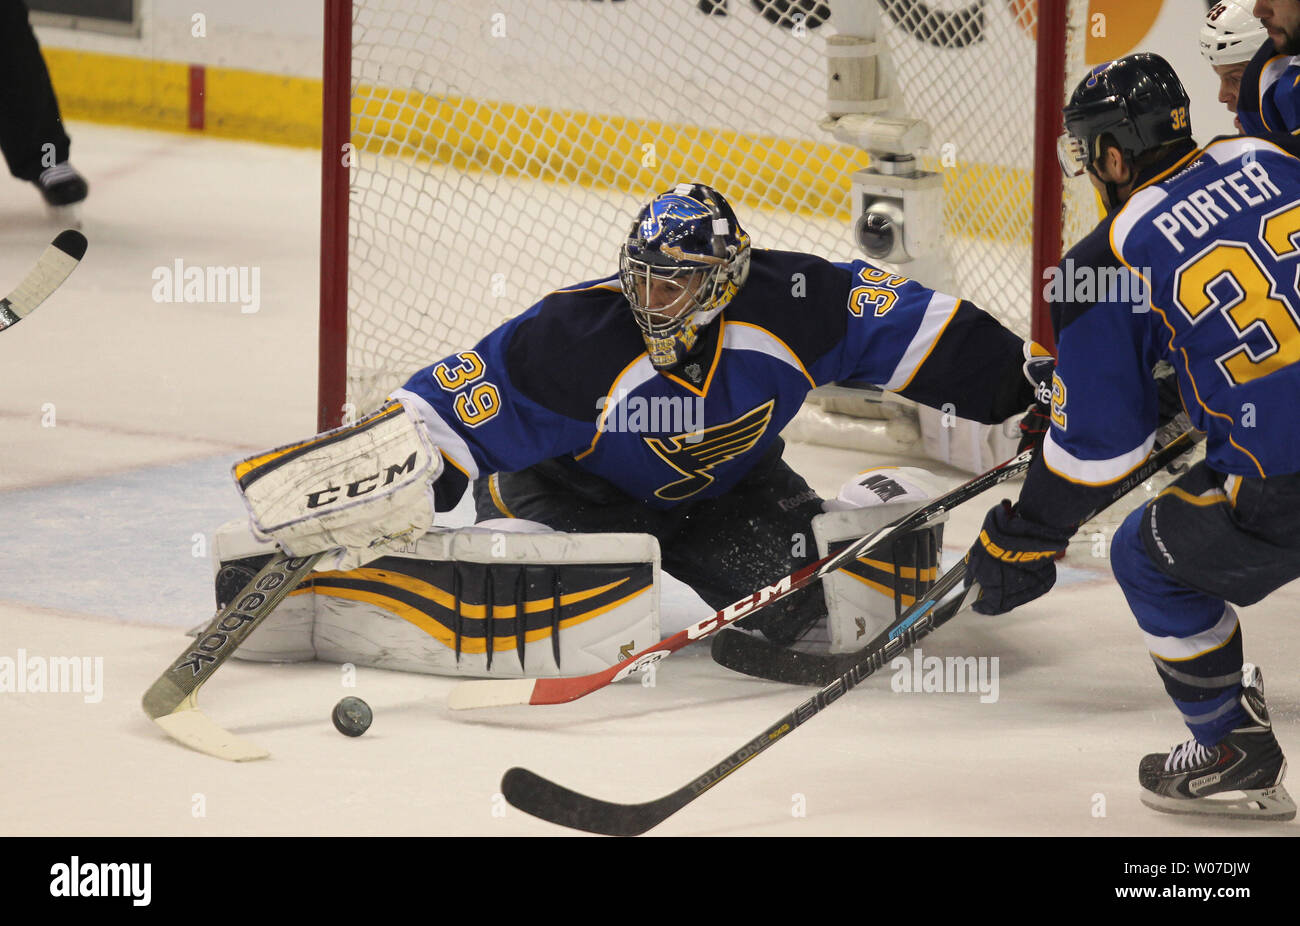 St. Louis Blues goaltender Ryan Miller controls a loose puck in front of his net during the first period against the Chicago Blackhawks in Game 2 of the Western Conference Playoffs at the Scottrade Center in St. Louis on April 19, 2014. UPI/Bill Greenblatt Stock Photo